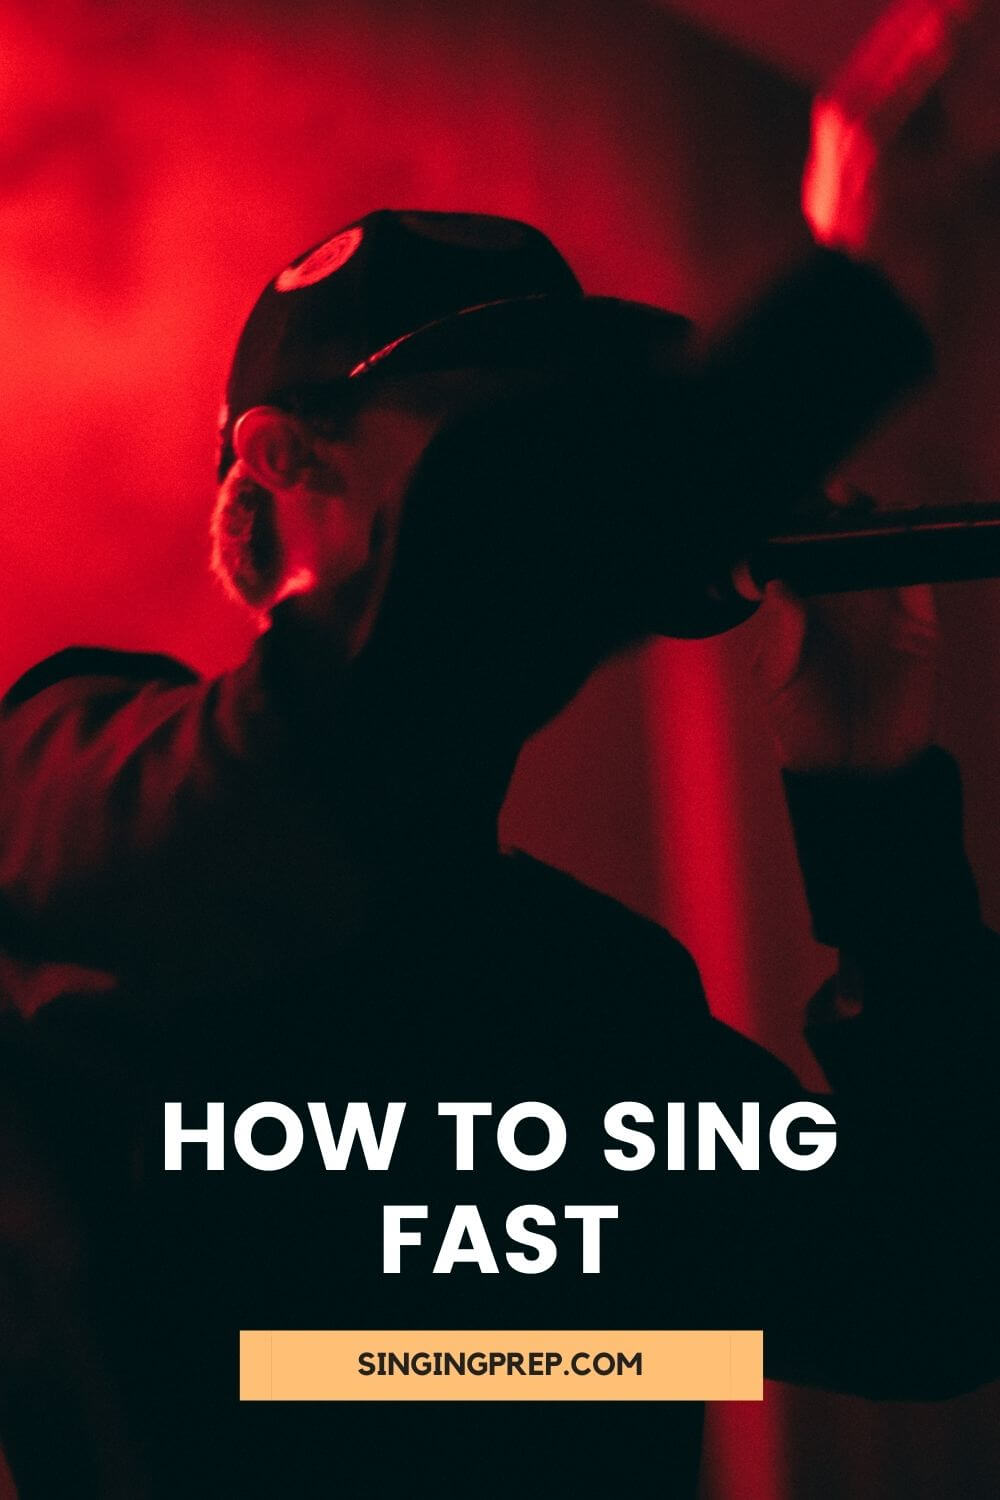 How to sing fast pin